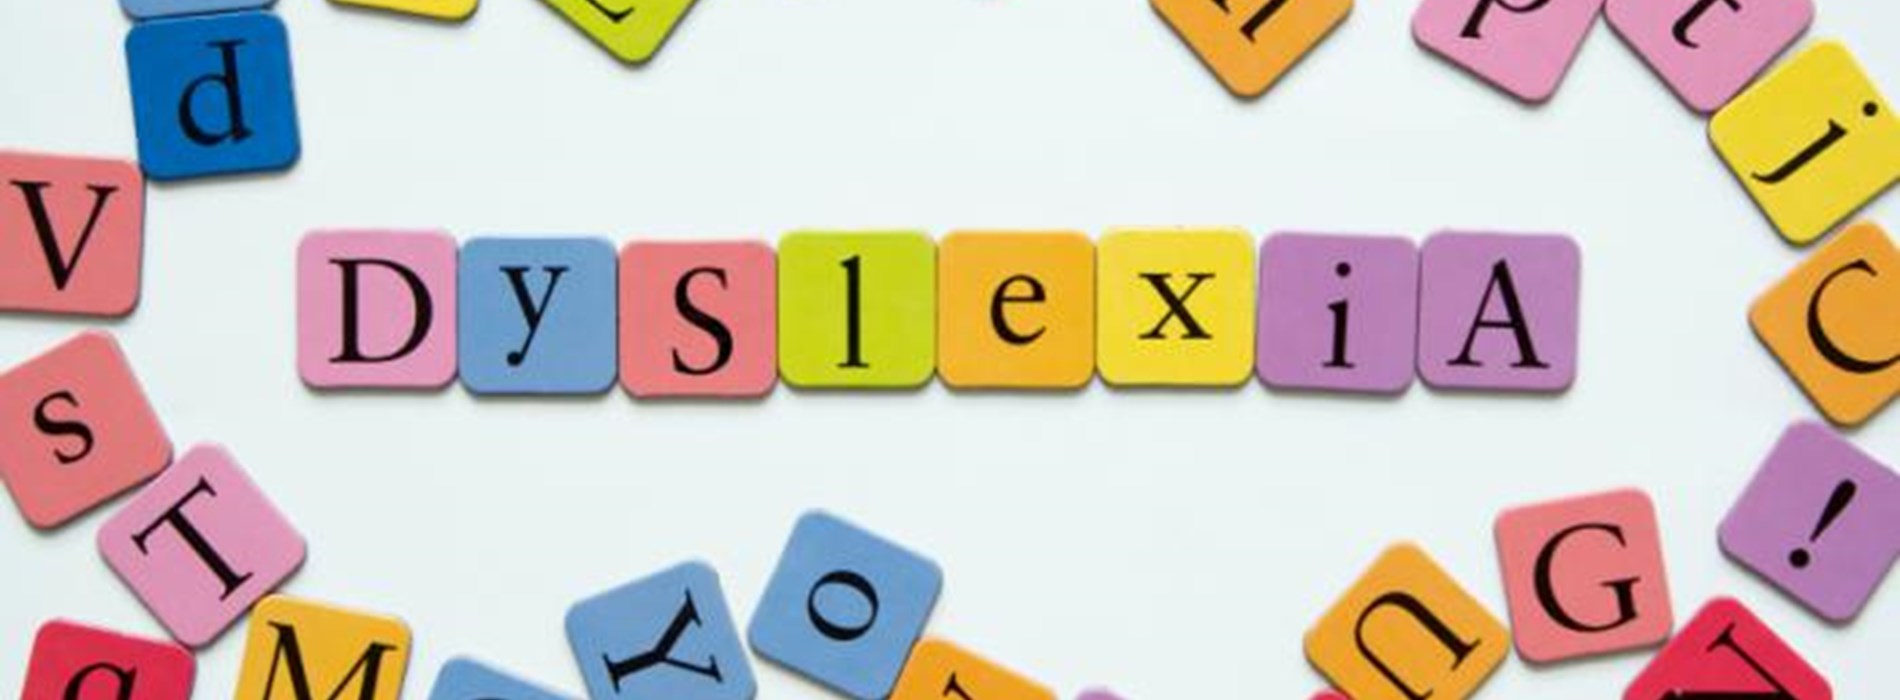 dyslexia-spelled-out-in-letters.jpg